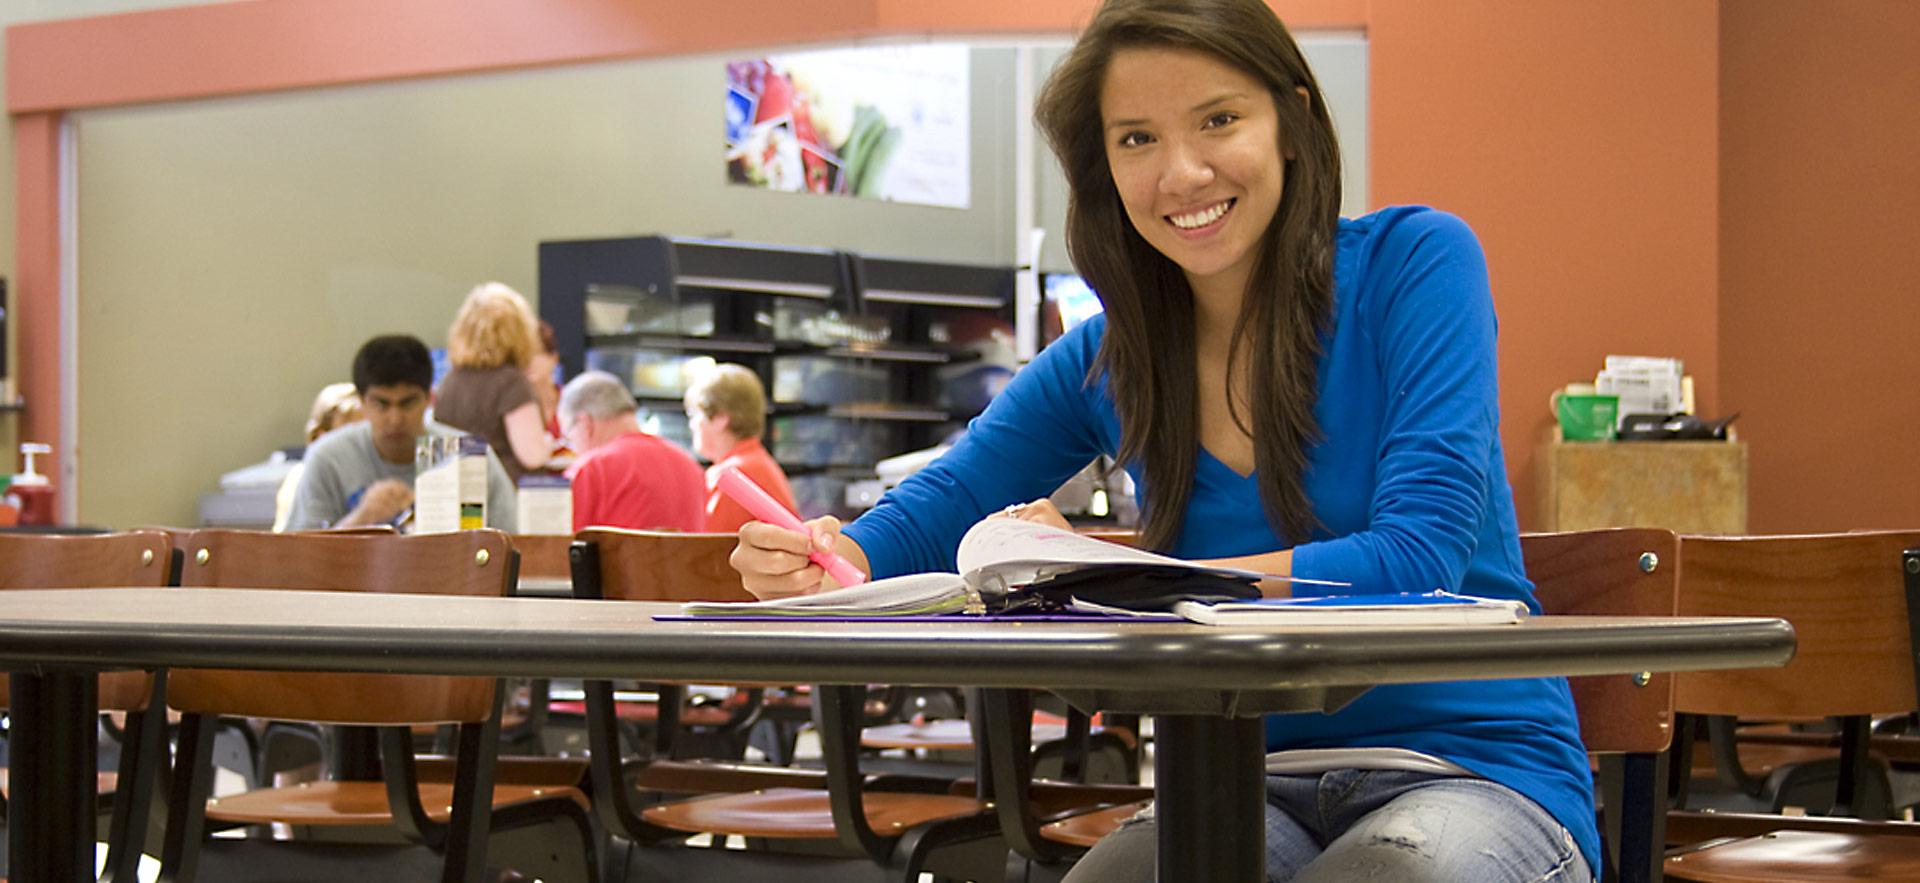 student smiling and sitting in cafeteria